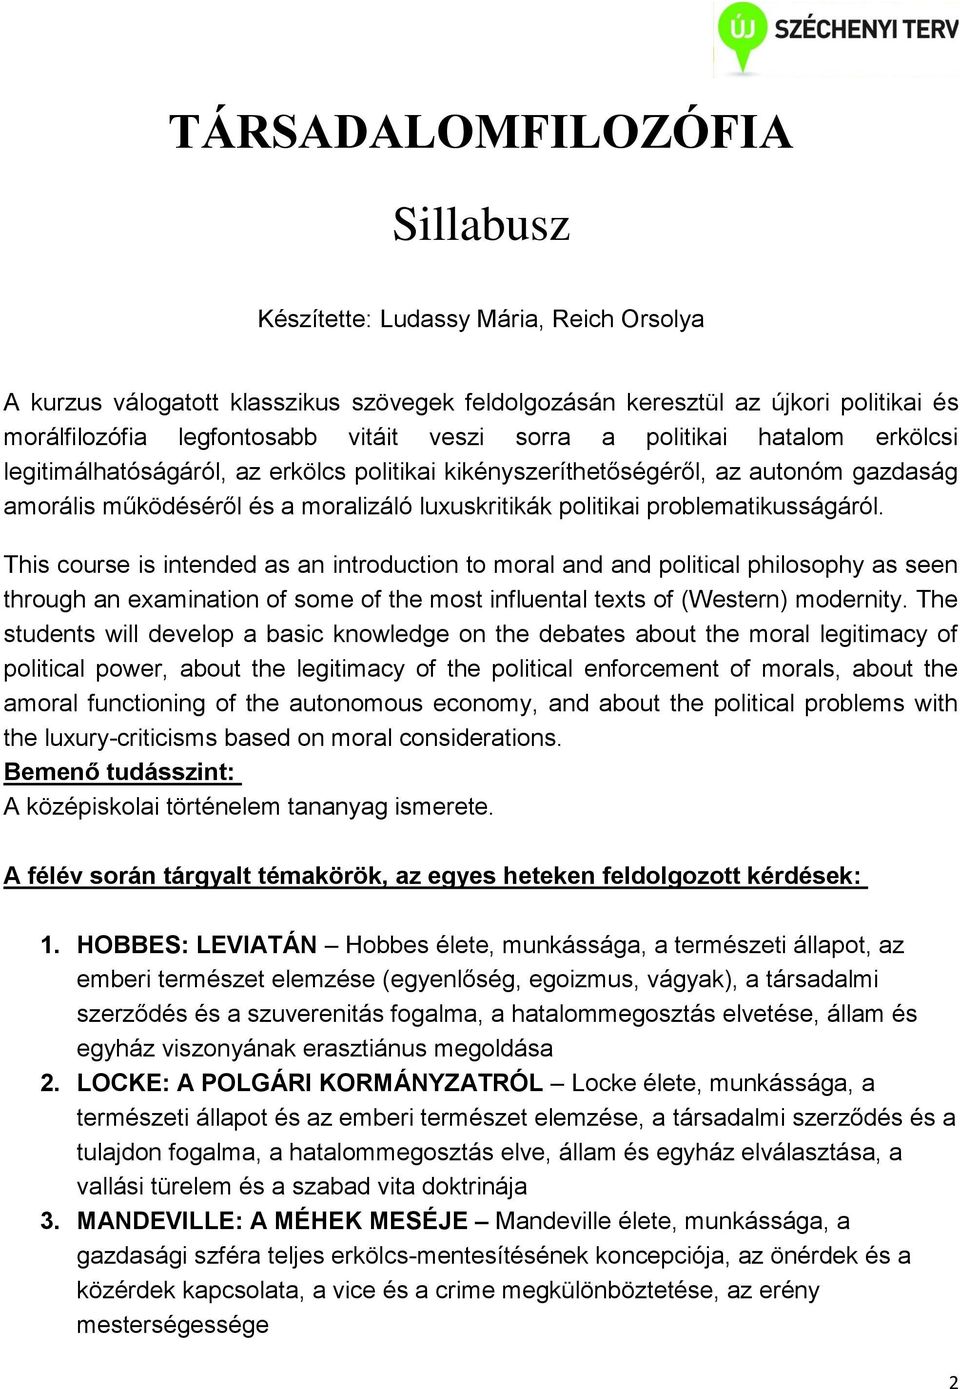 problematikusságáról. This course is intended as an introduction to moral and and political philosophy as seen through an examination of some of the most influental texts of (Western) modernity.